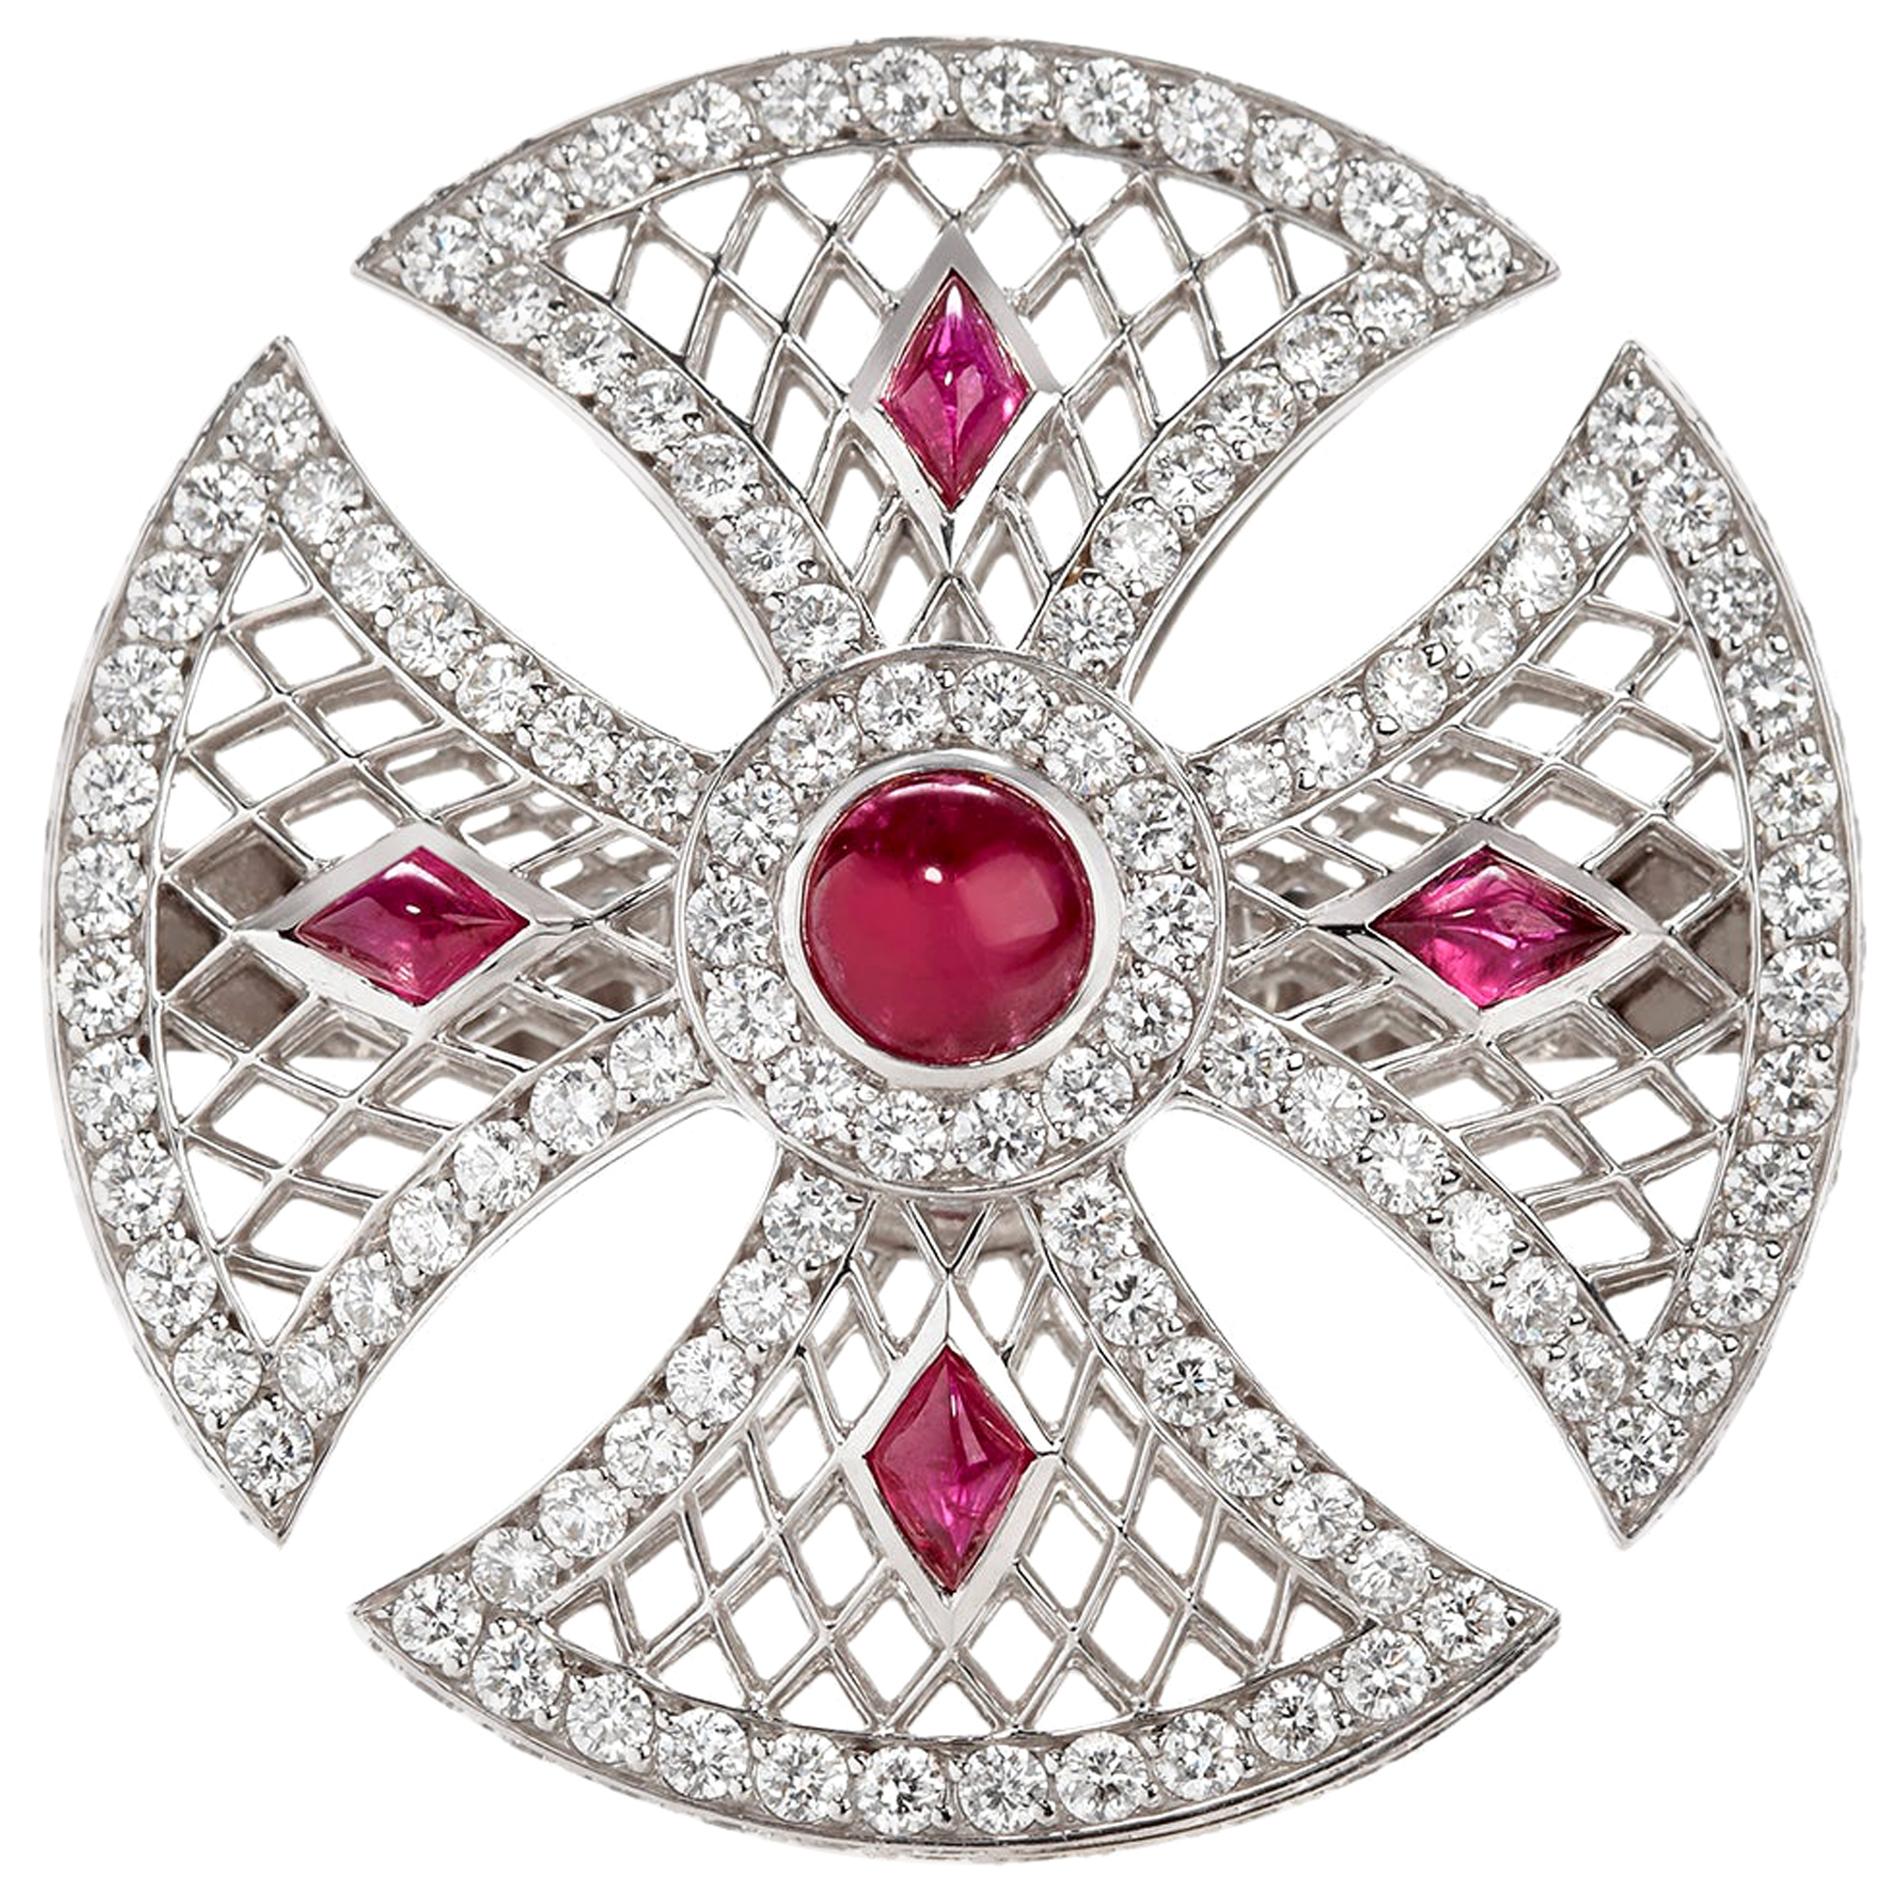 Sybarite Heritage Ring in White Gold with White Diamonds & Rubies